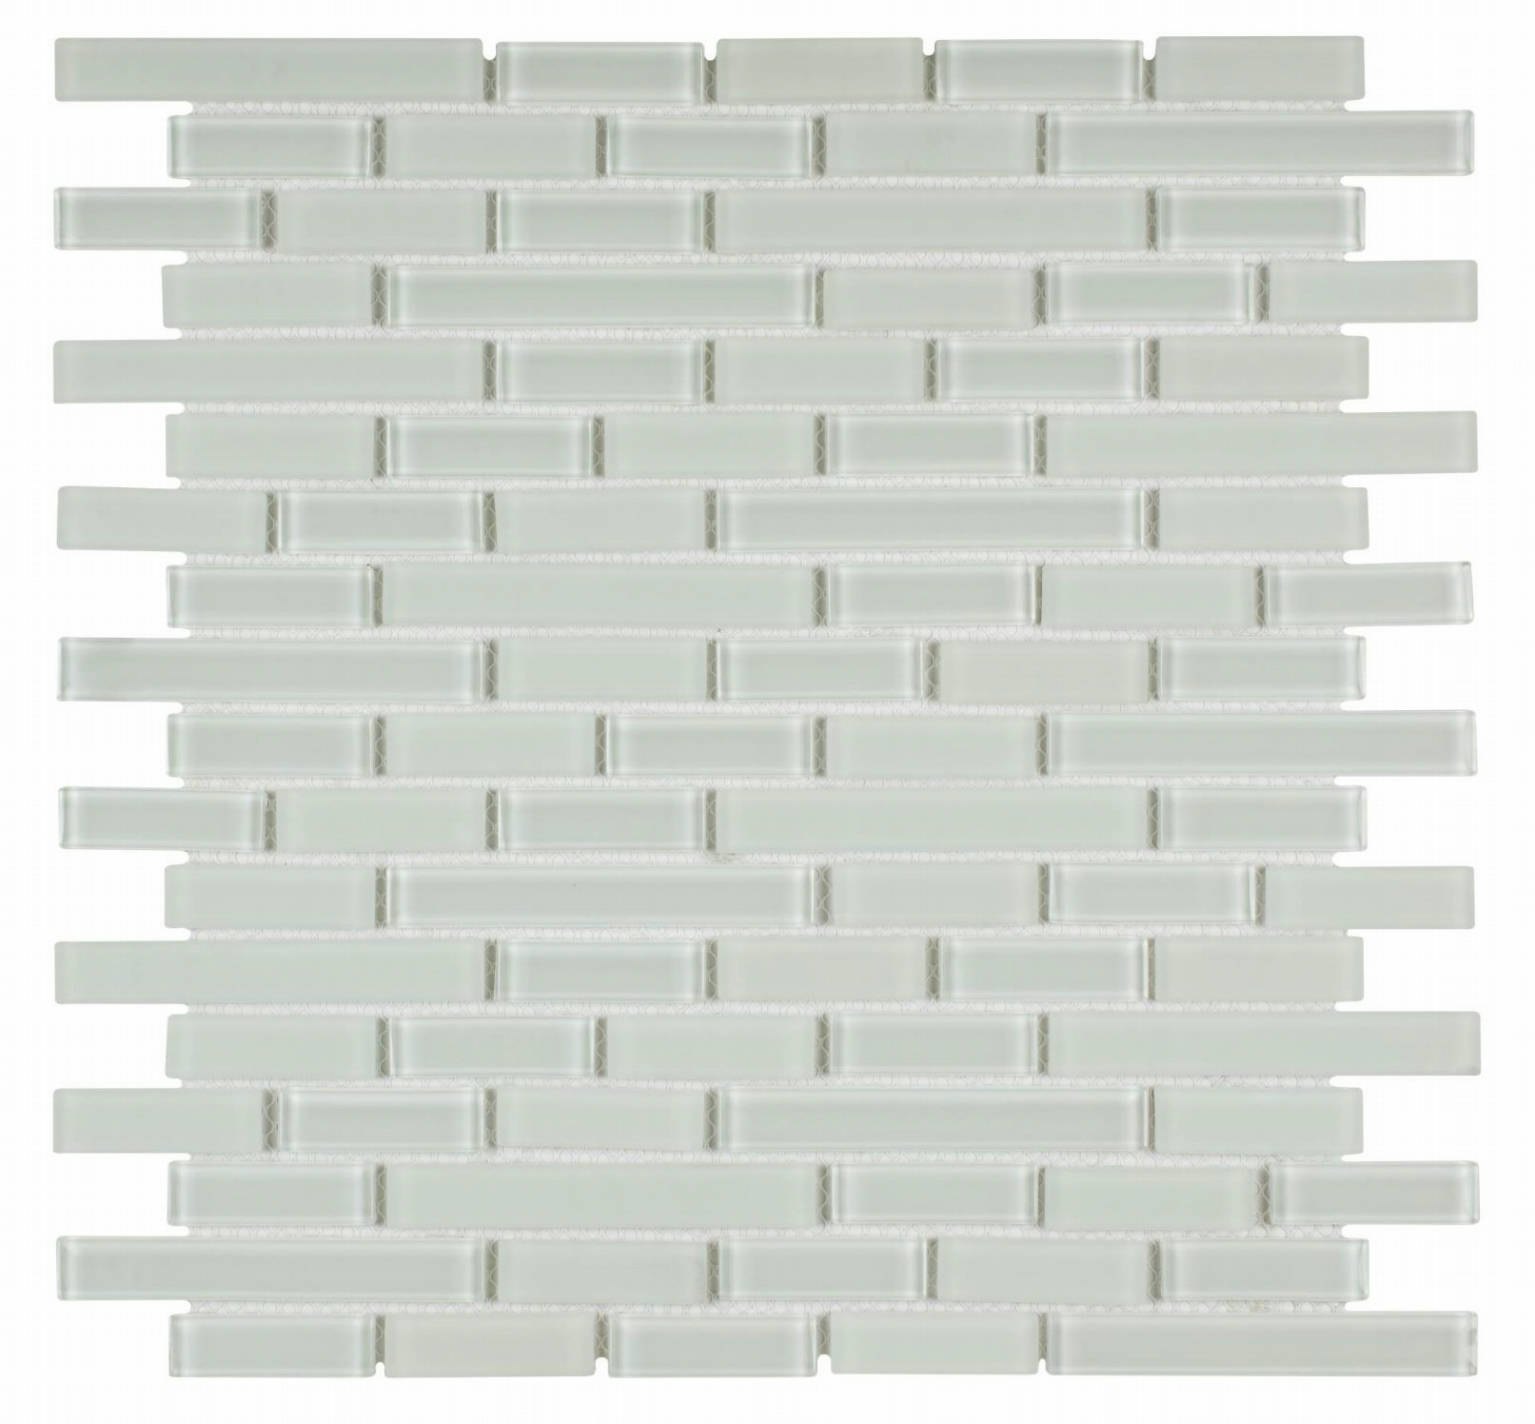 HLD4-016 | Stones & More | Finest selection of Mosaics, Glass, Tile and Stone